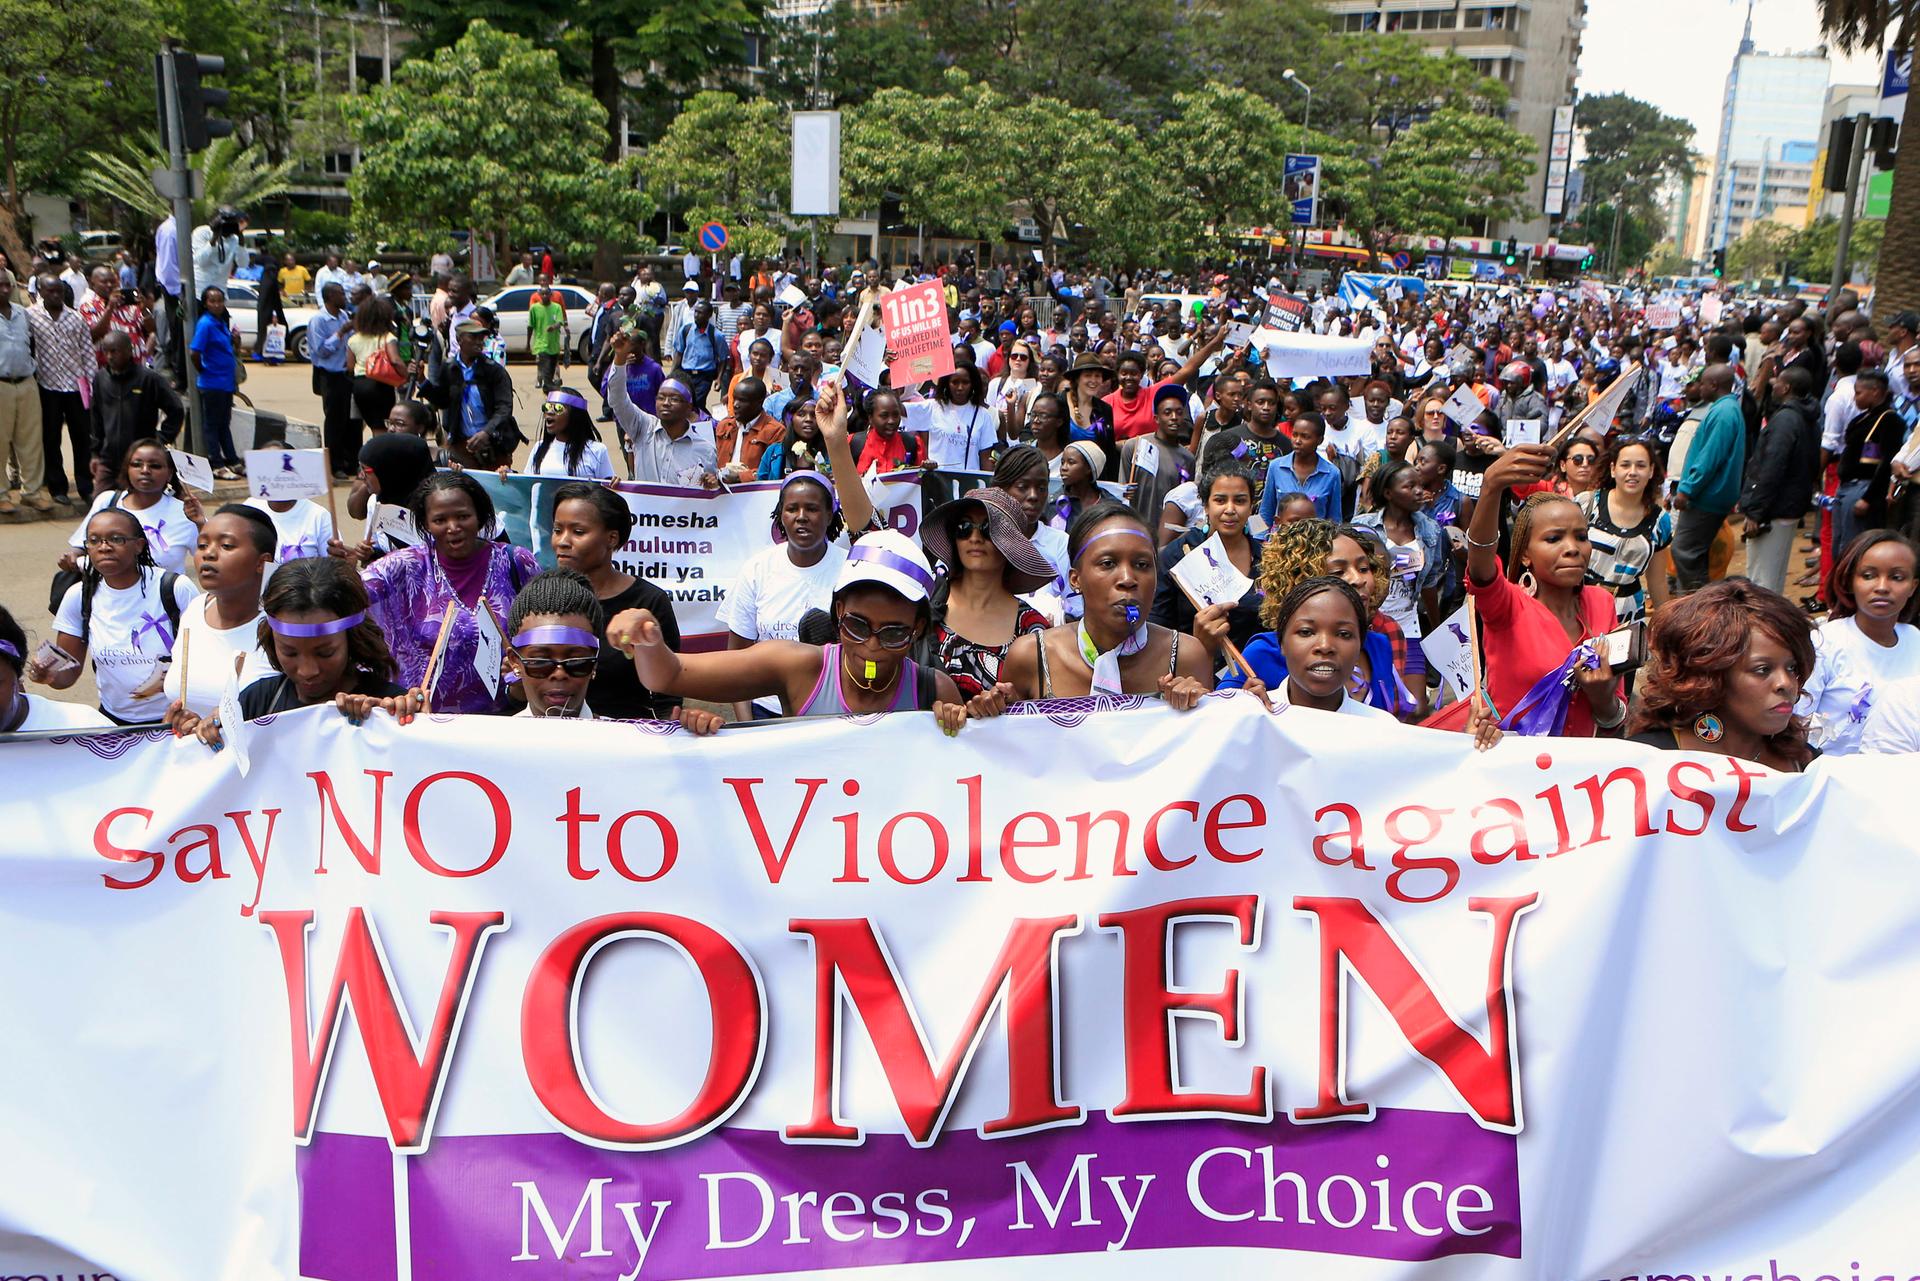 Kenyan women take part in a protest along a main street in the Kenyan capital of Nairobi on November 17, 2014. They were demanding justice for a woman who was attacked and stripped recently by men who claimed that she was dressed indecently.